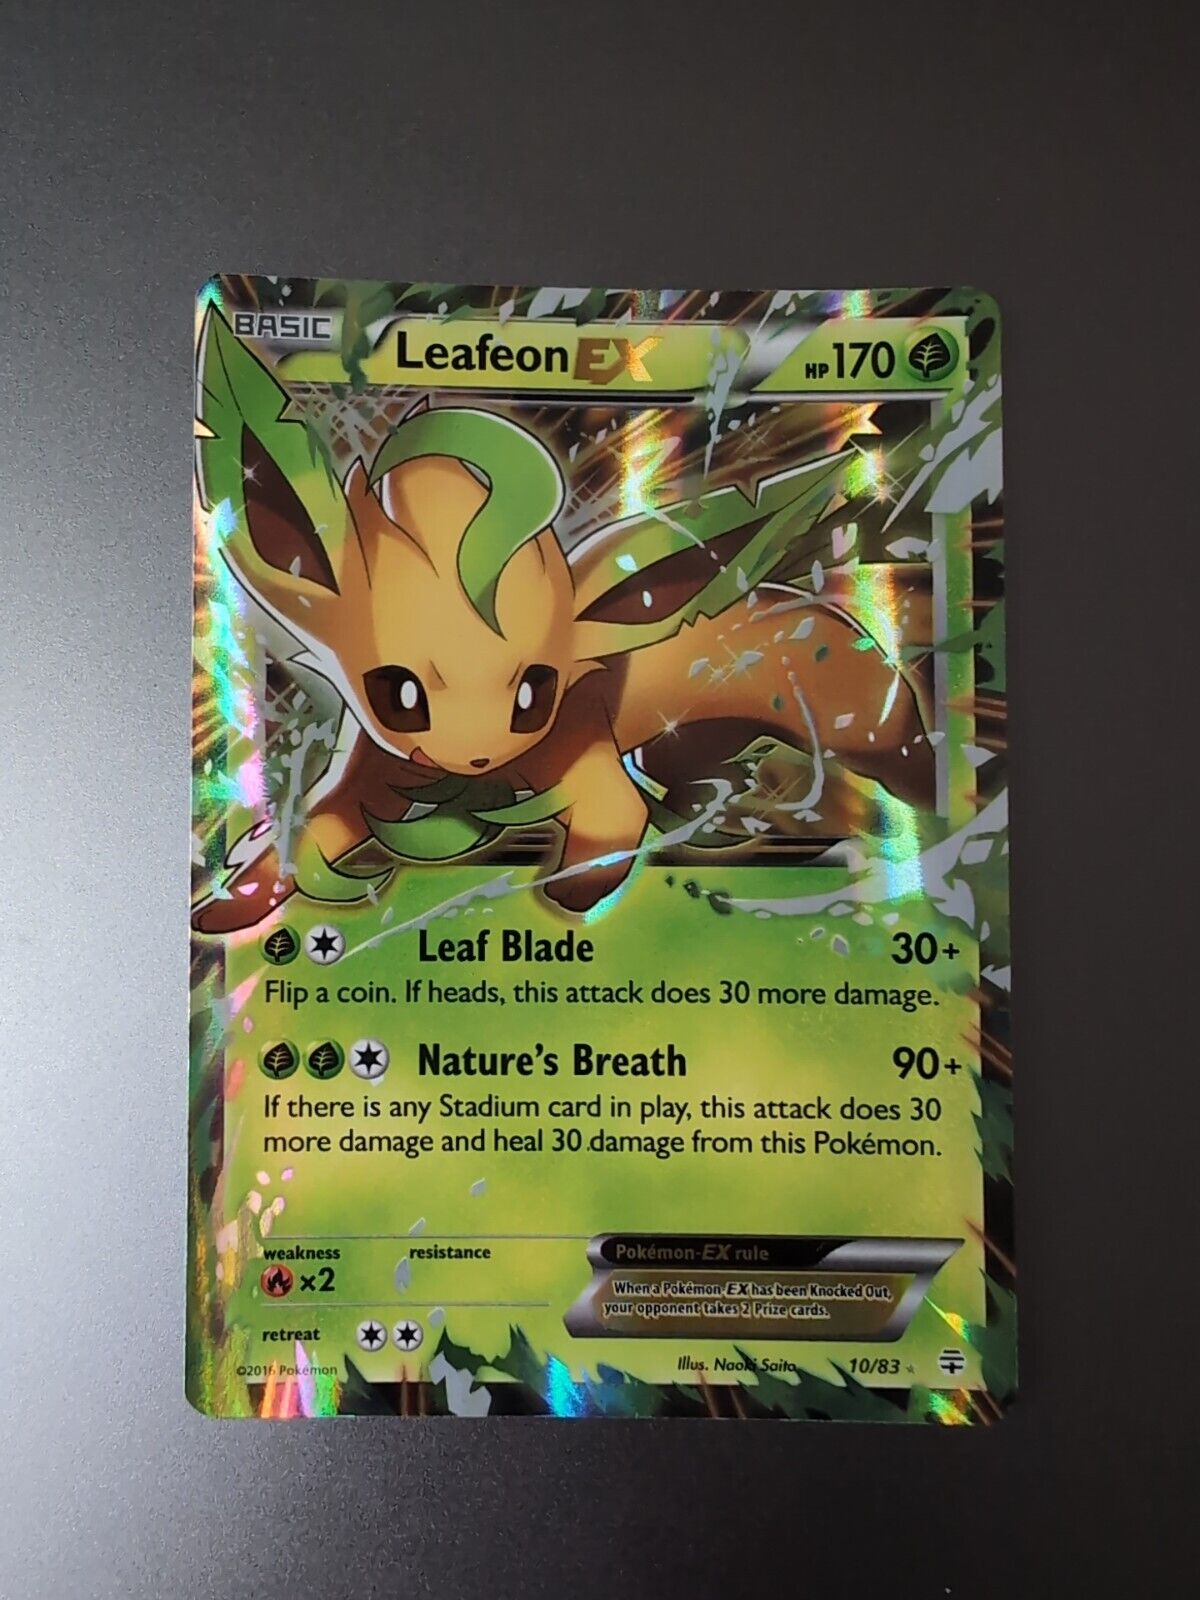 Leafeon EX 10/83 XY Generations Pokemon Card in Good Condition